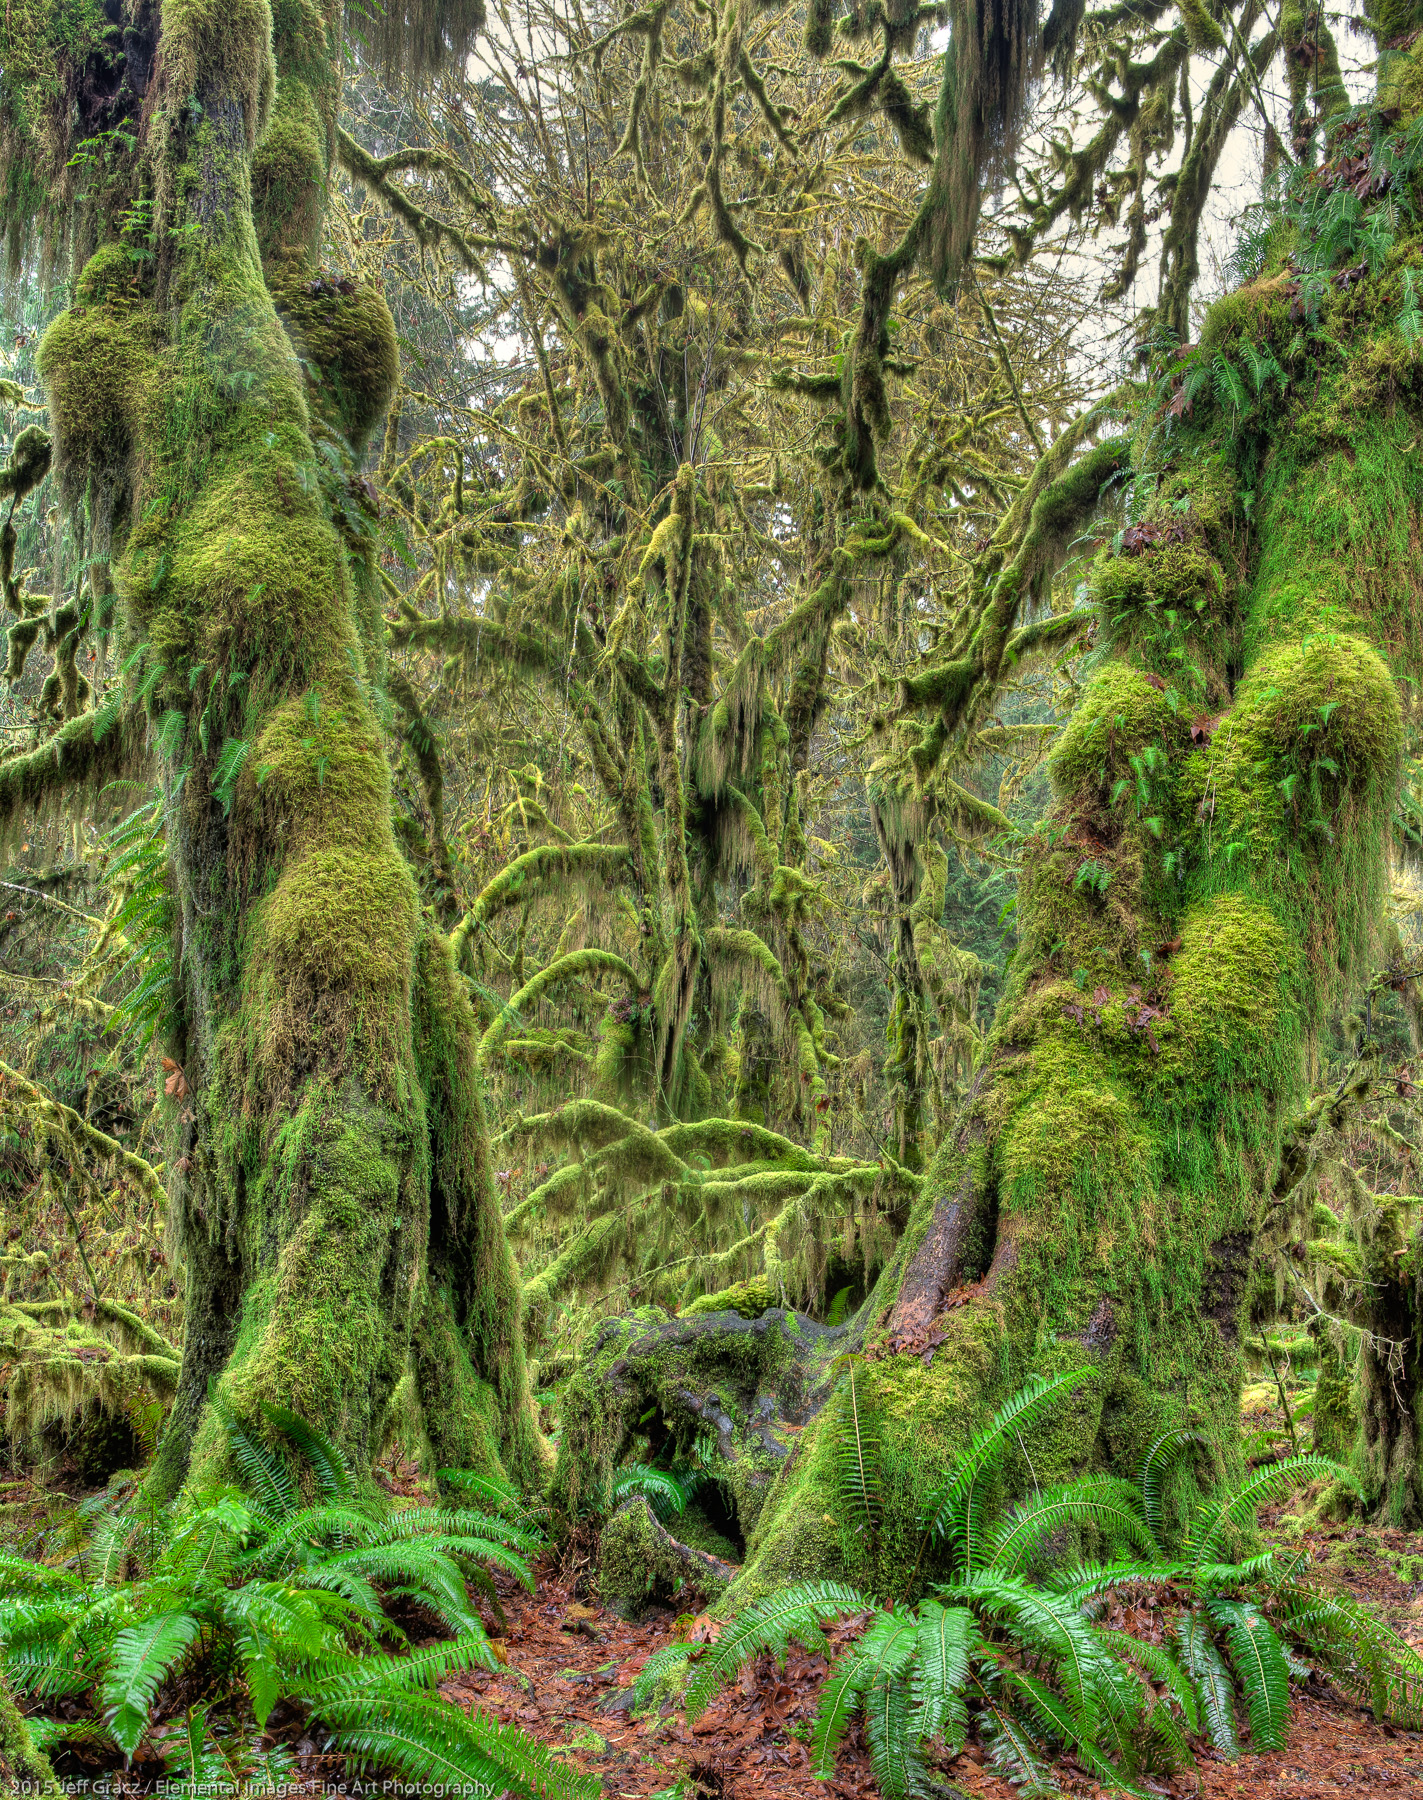 Elders of the Green | Olympic National Park | WA | USA - © 2015 Jeff Gracz / Elemental Images Fine Art Photography - All Rights Reserved Worldwide